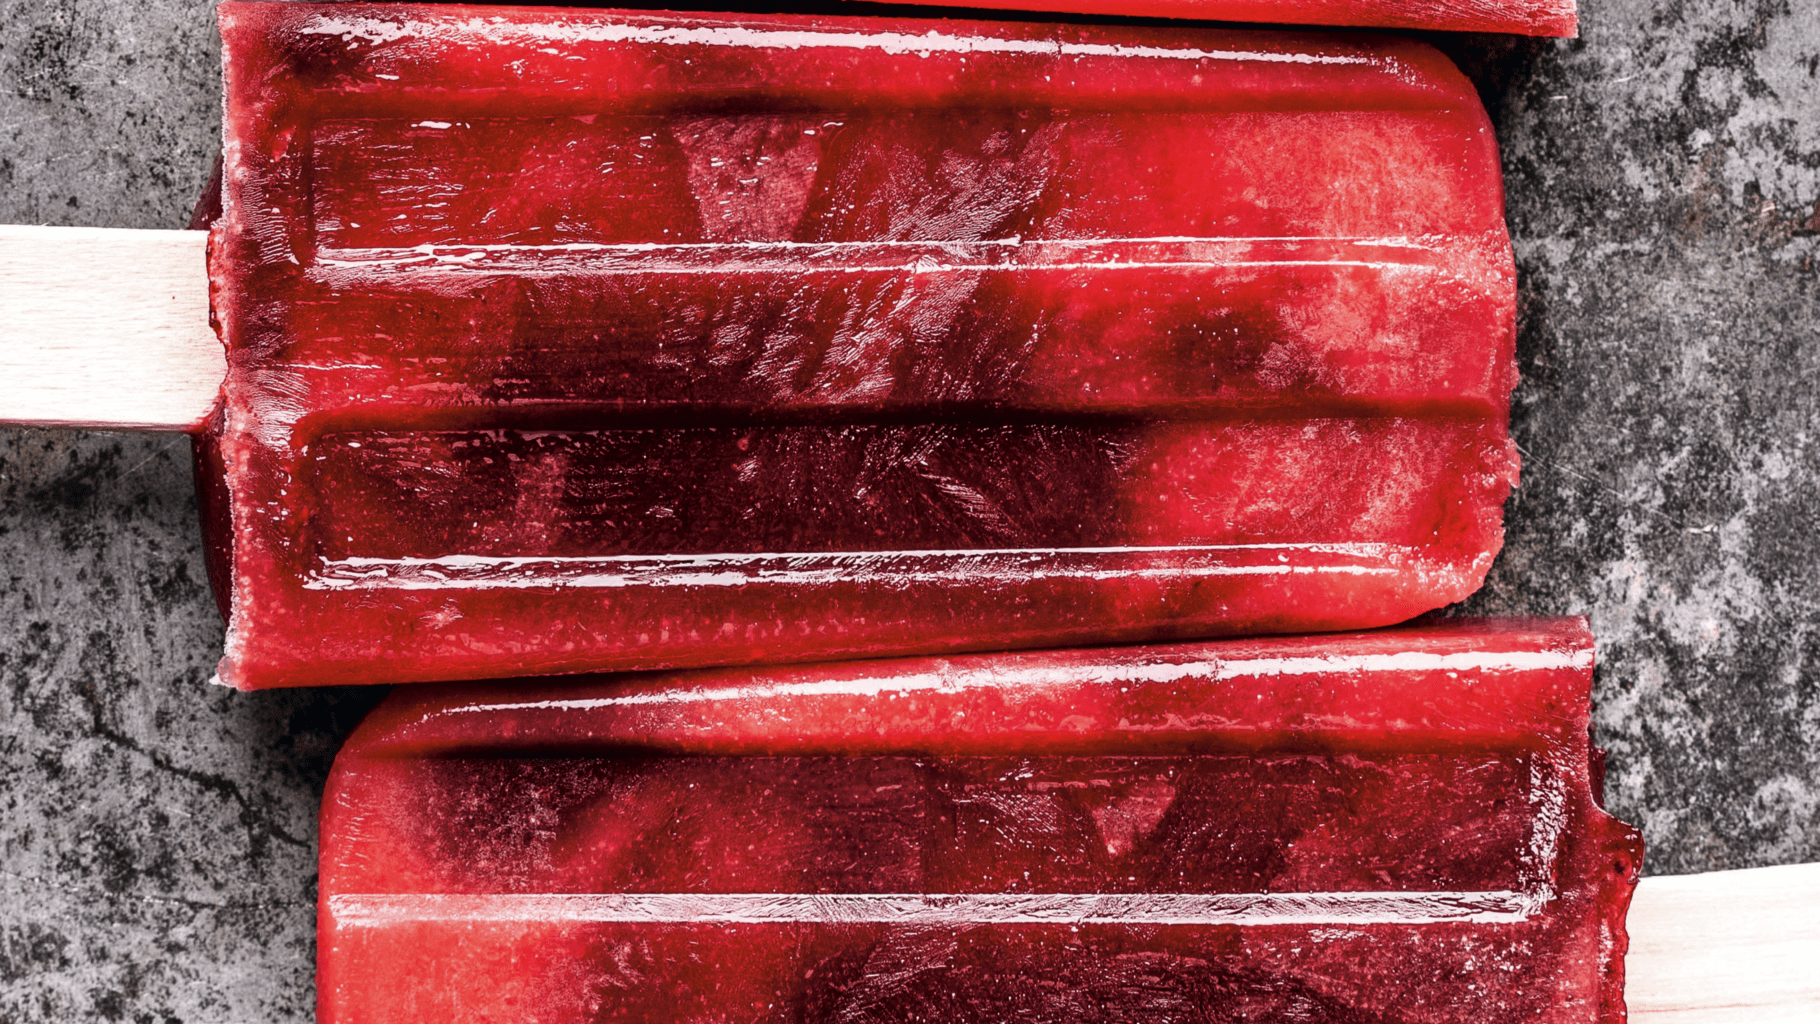 Tie-Dye Berry Paletas excerpted from Flavor+Us: Cooking for Everyone by Rahanna Bisseret Martinez.